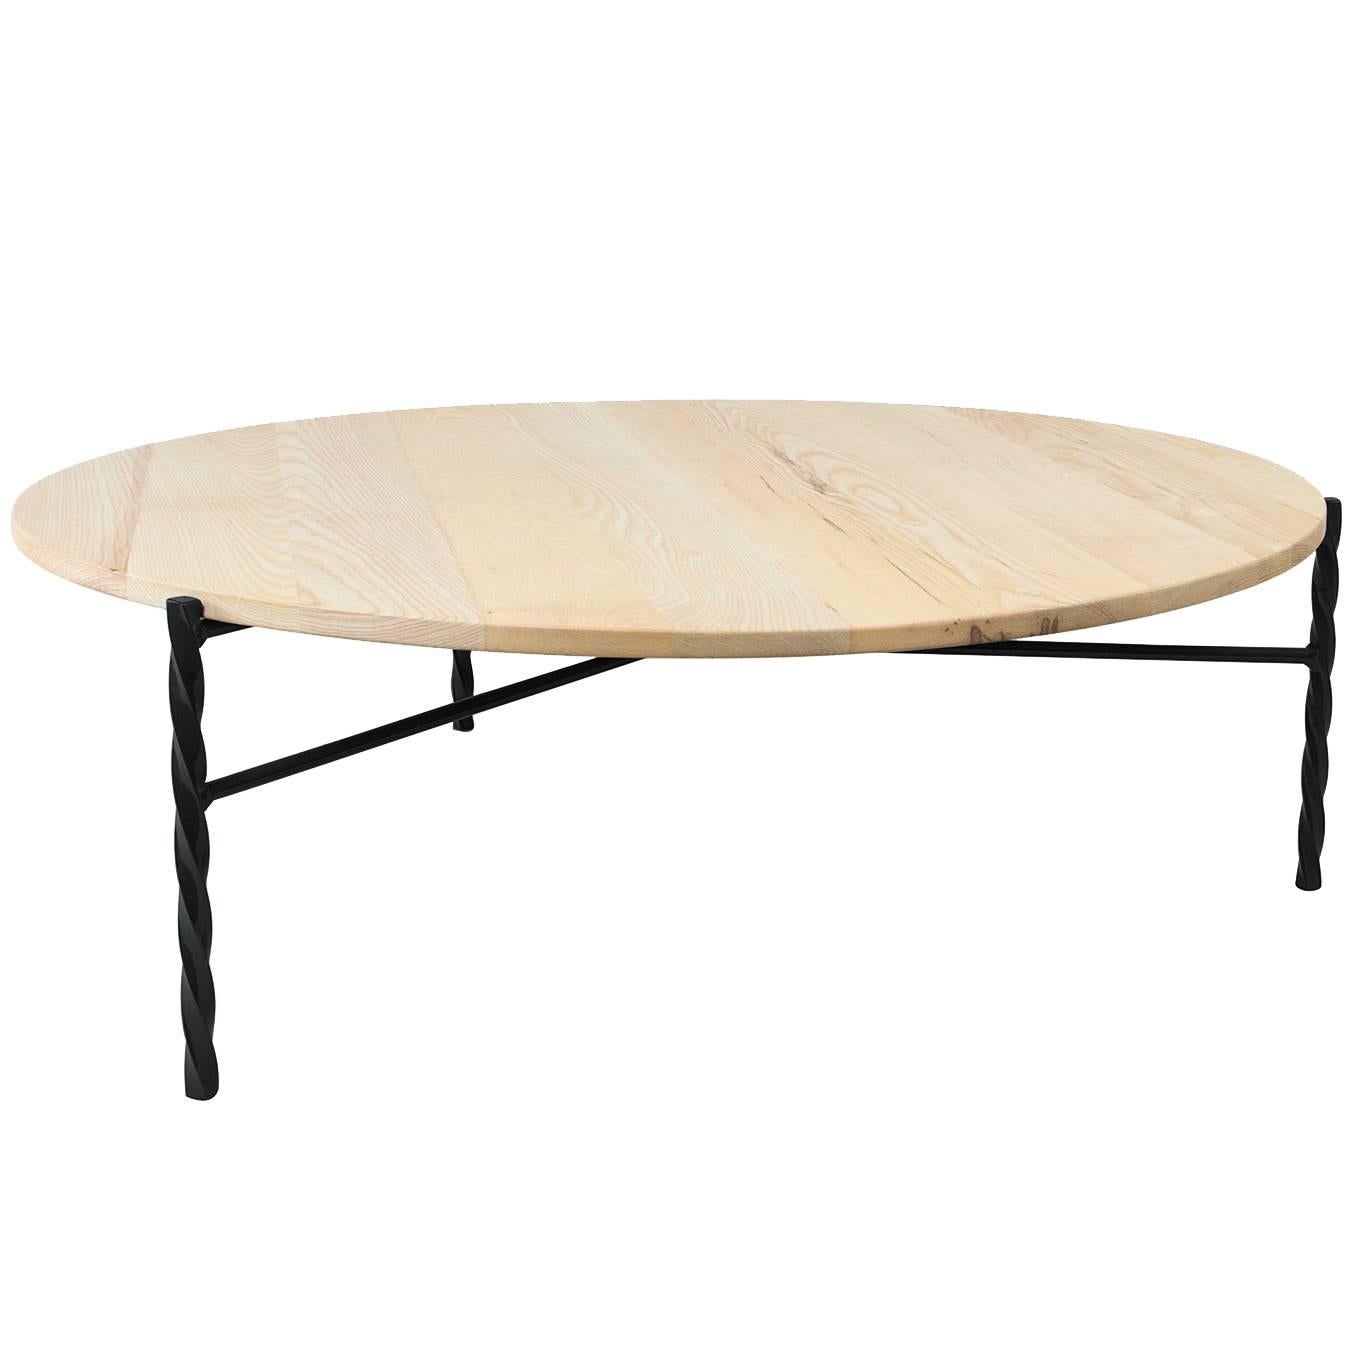 Von Iron Coffee Table from Souda, Natural Ash Top, Made to Order